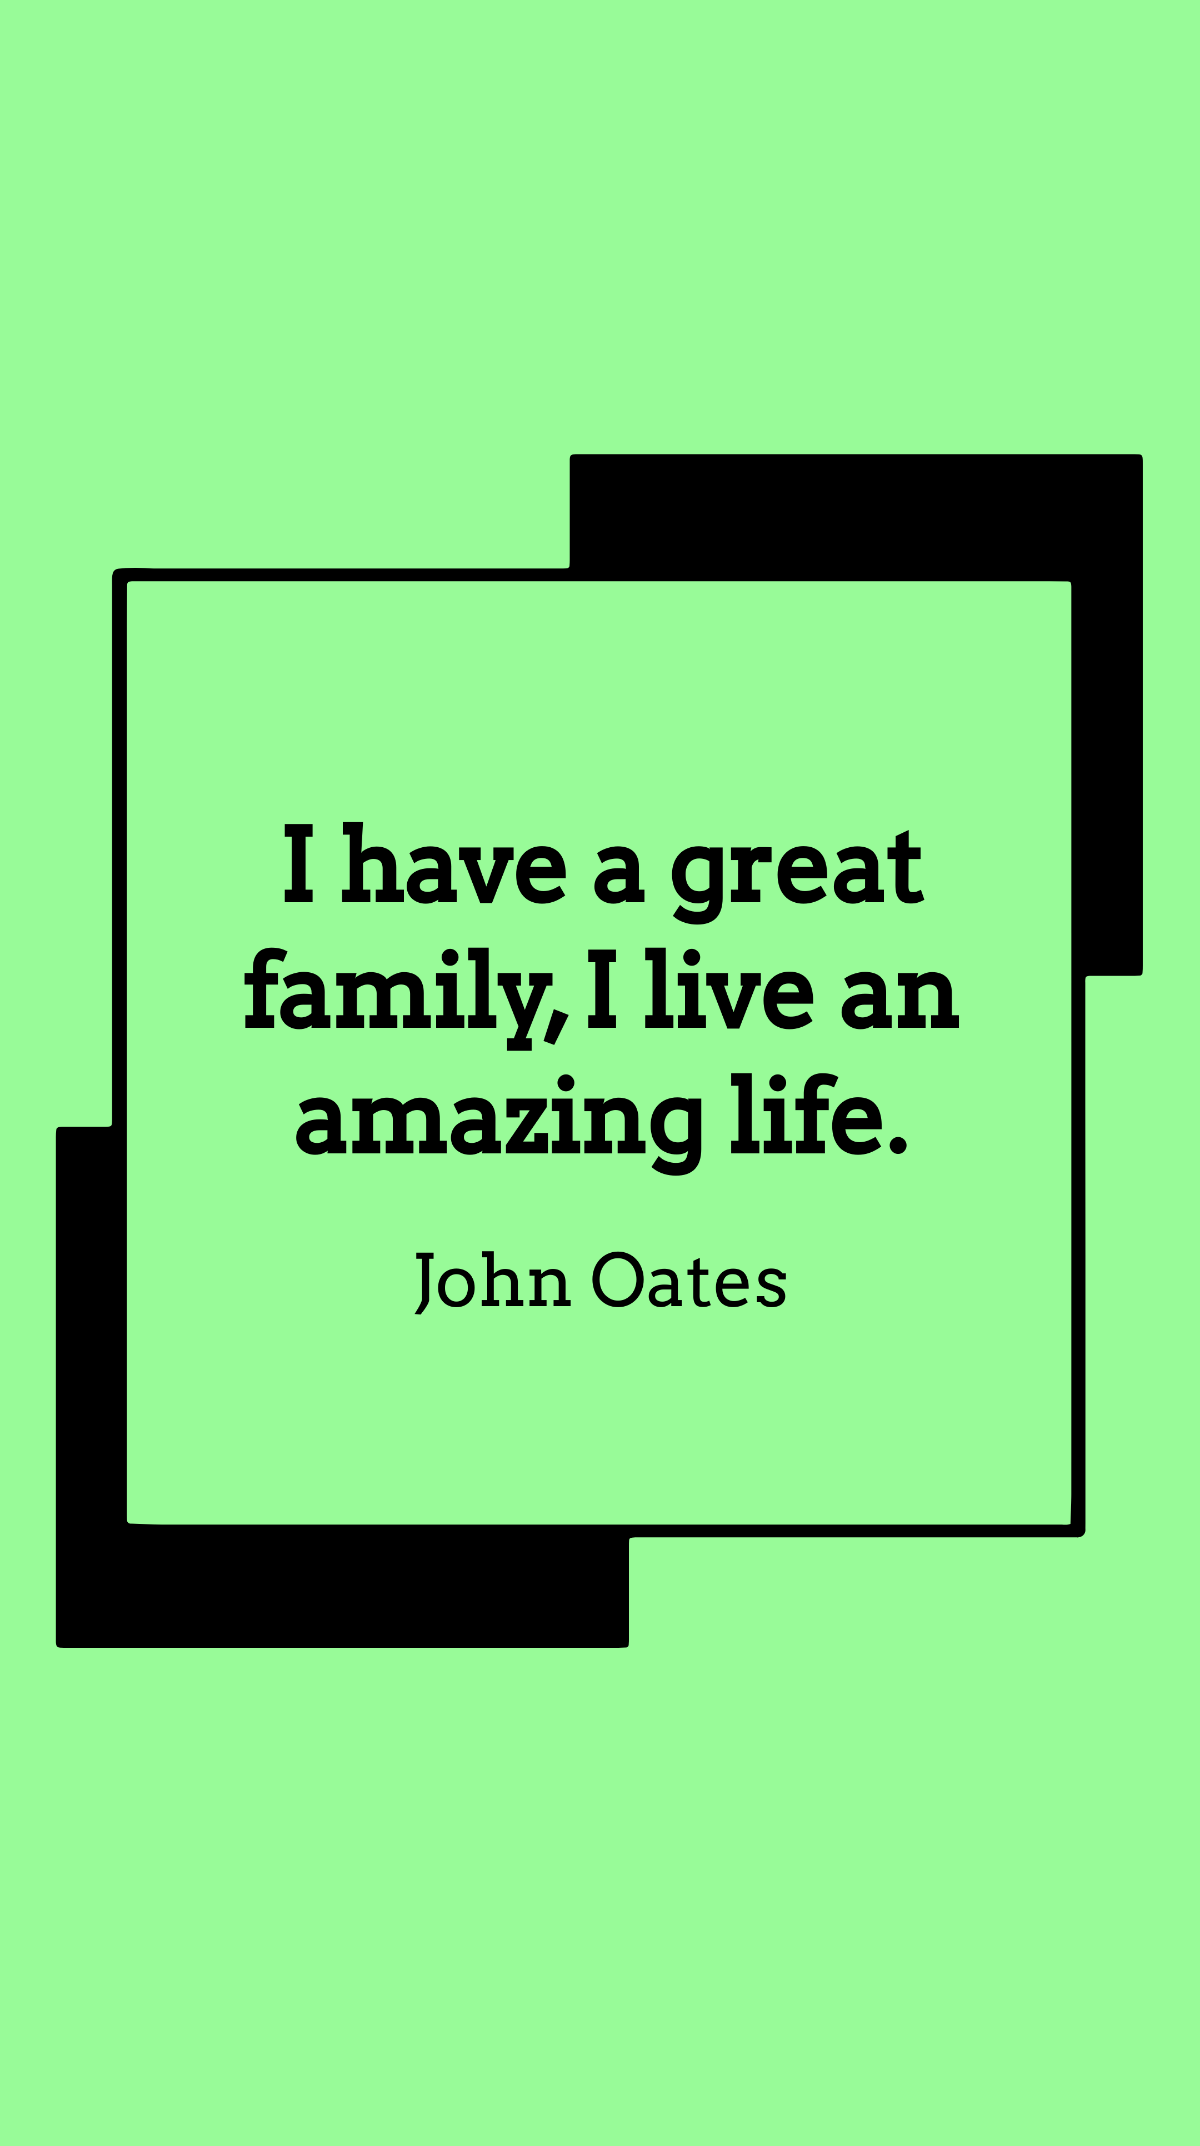 John Oates - I have a great family, I live an amazing life. Template